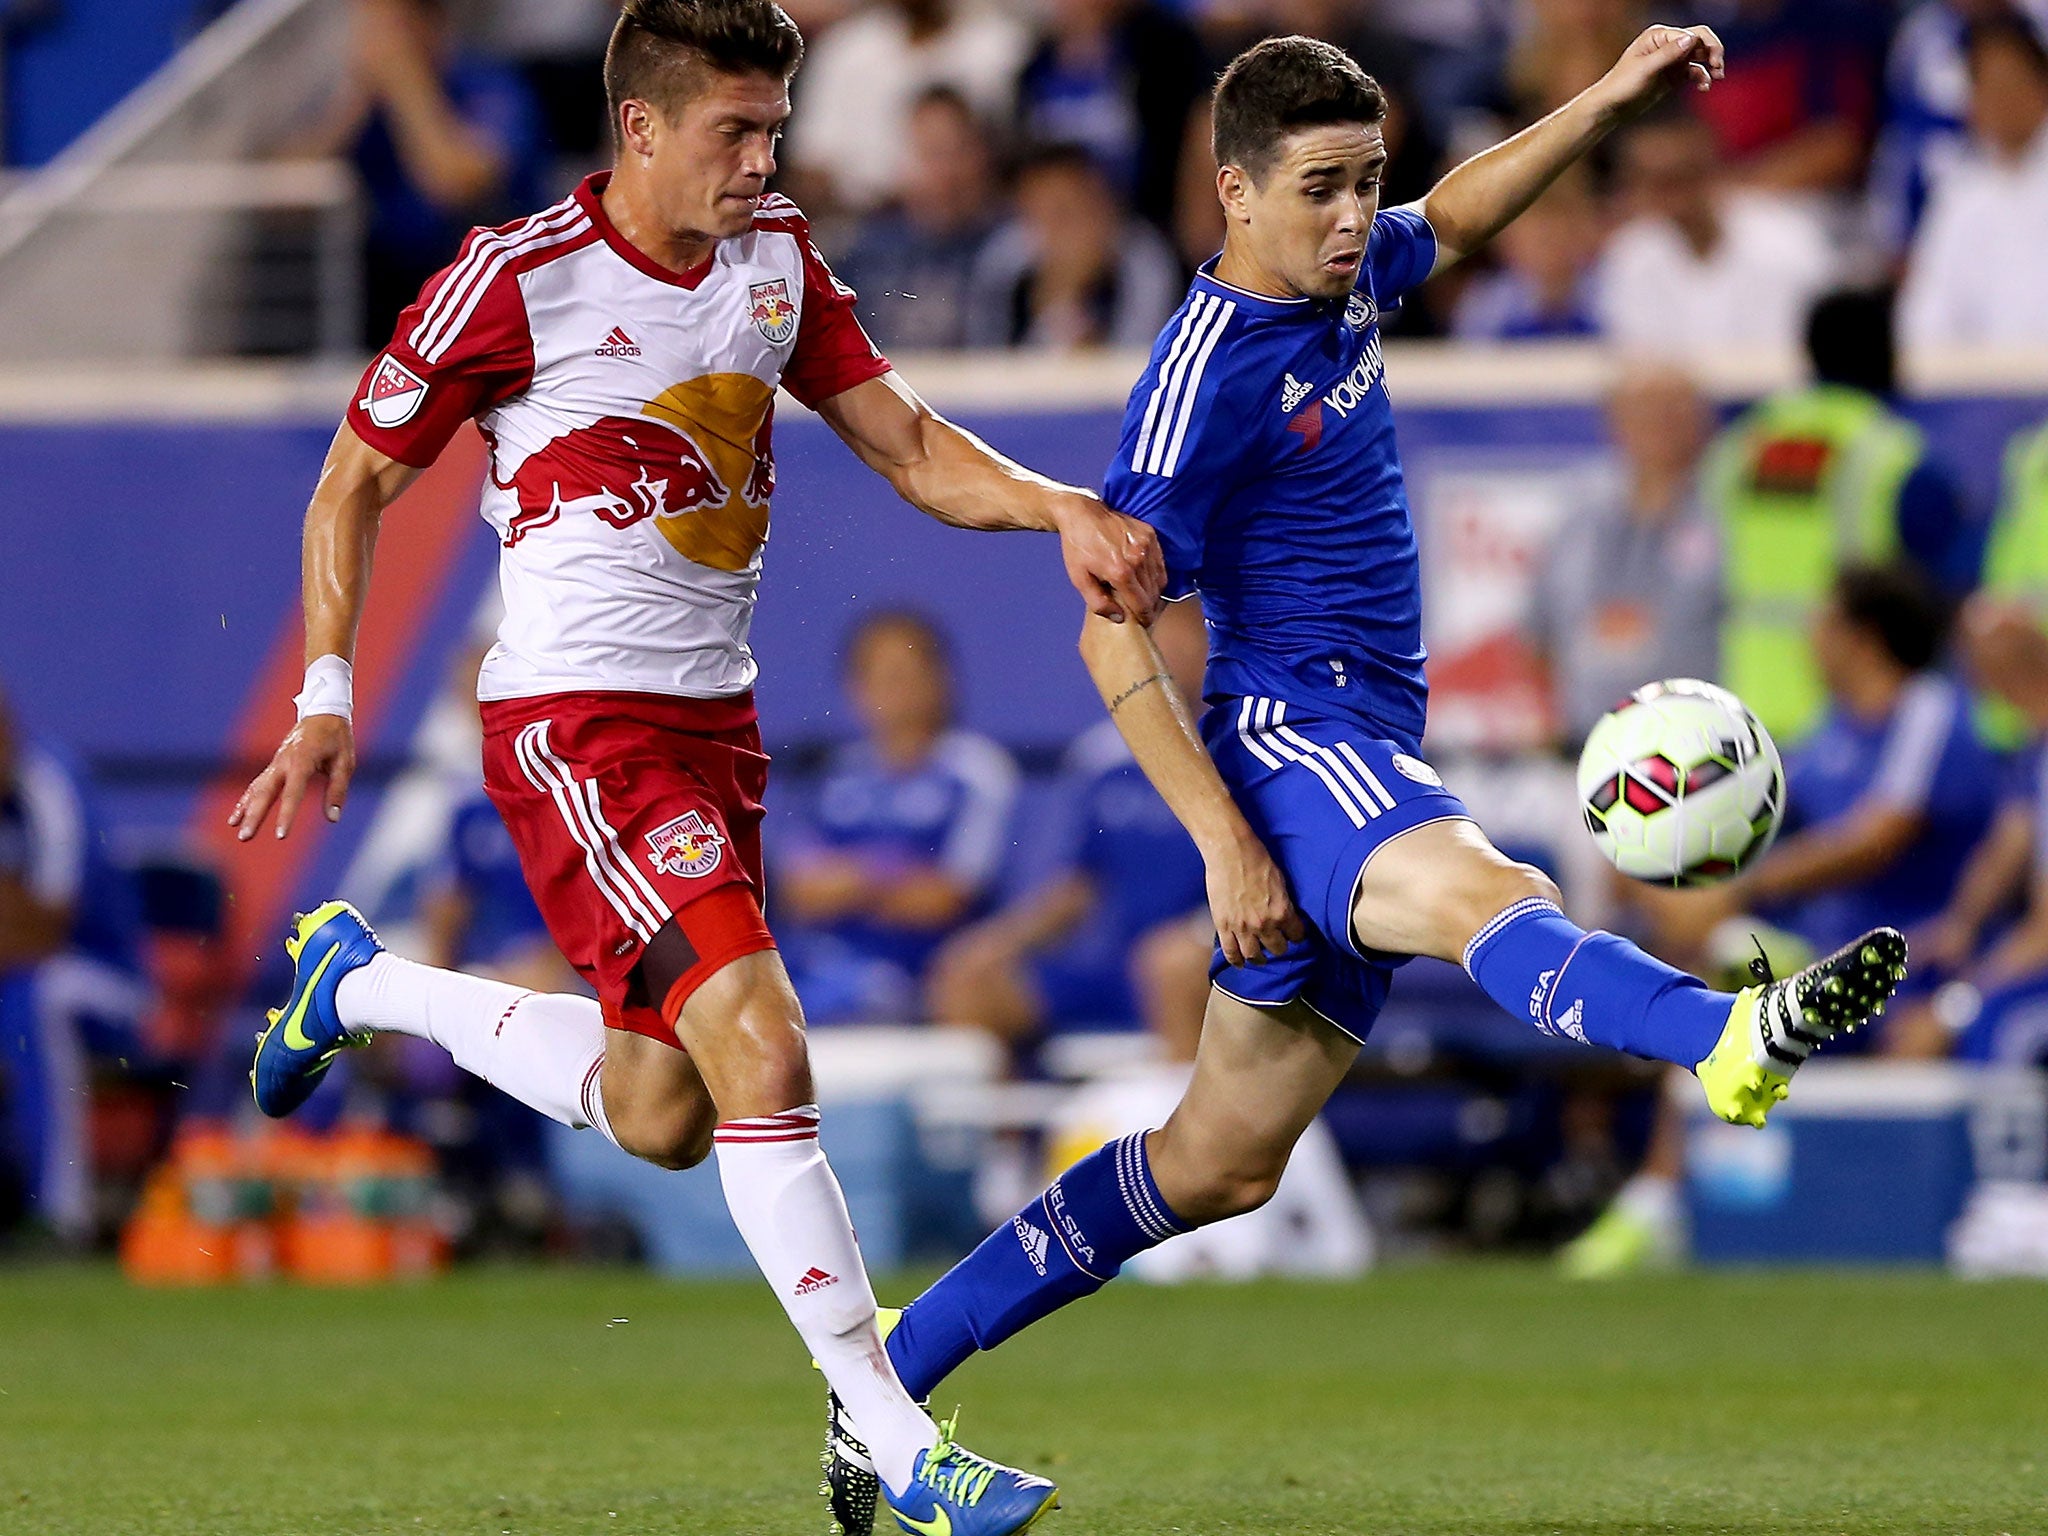 Chelsea’s Oscar tries to shield the ball from Michael da Fonte, of the New York Red Bulls, in Harrison, New Jersey, where the visitors lost 4-2